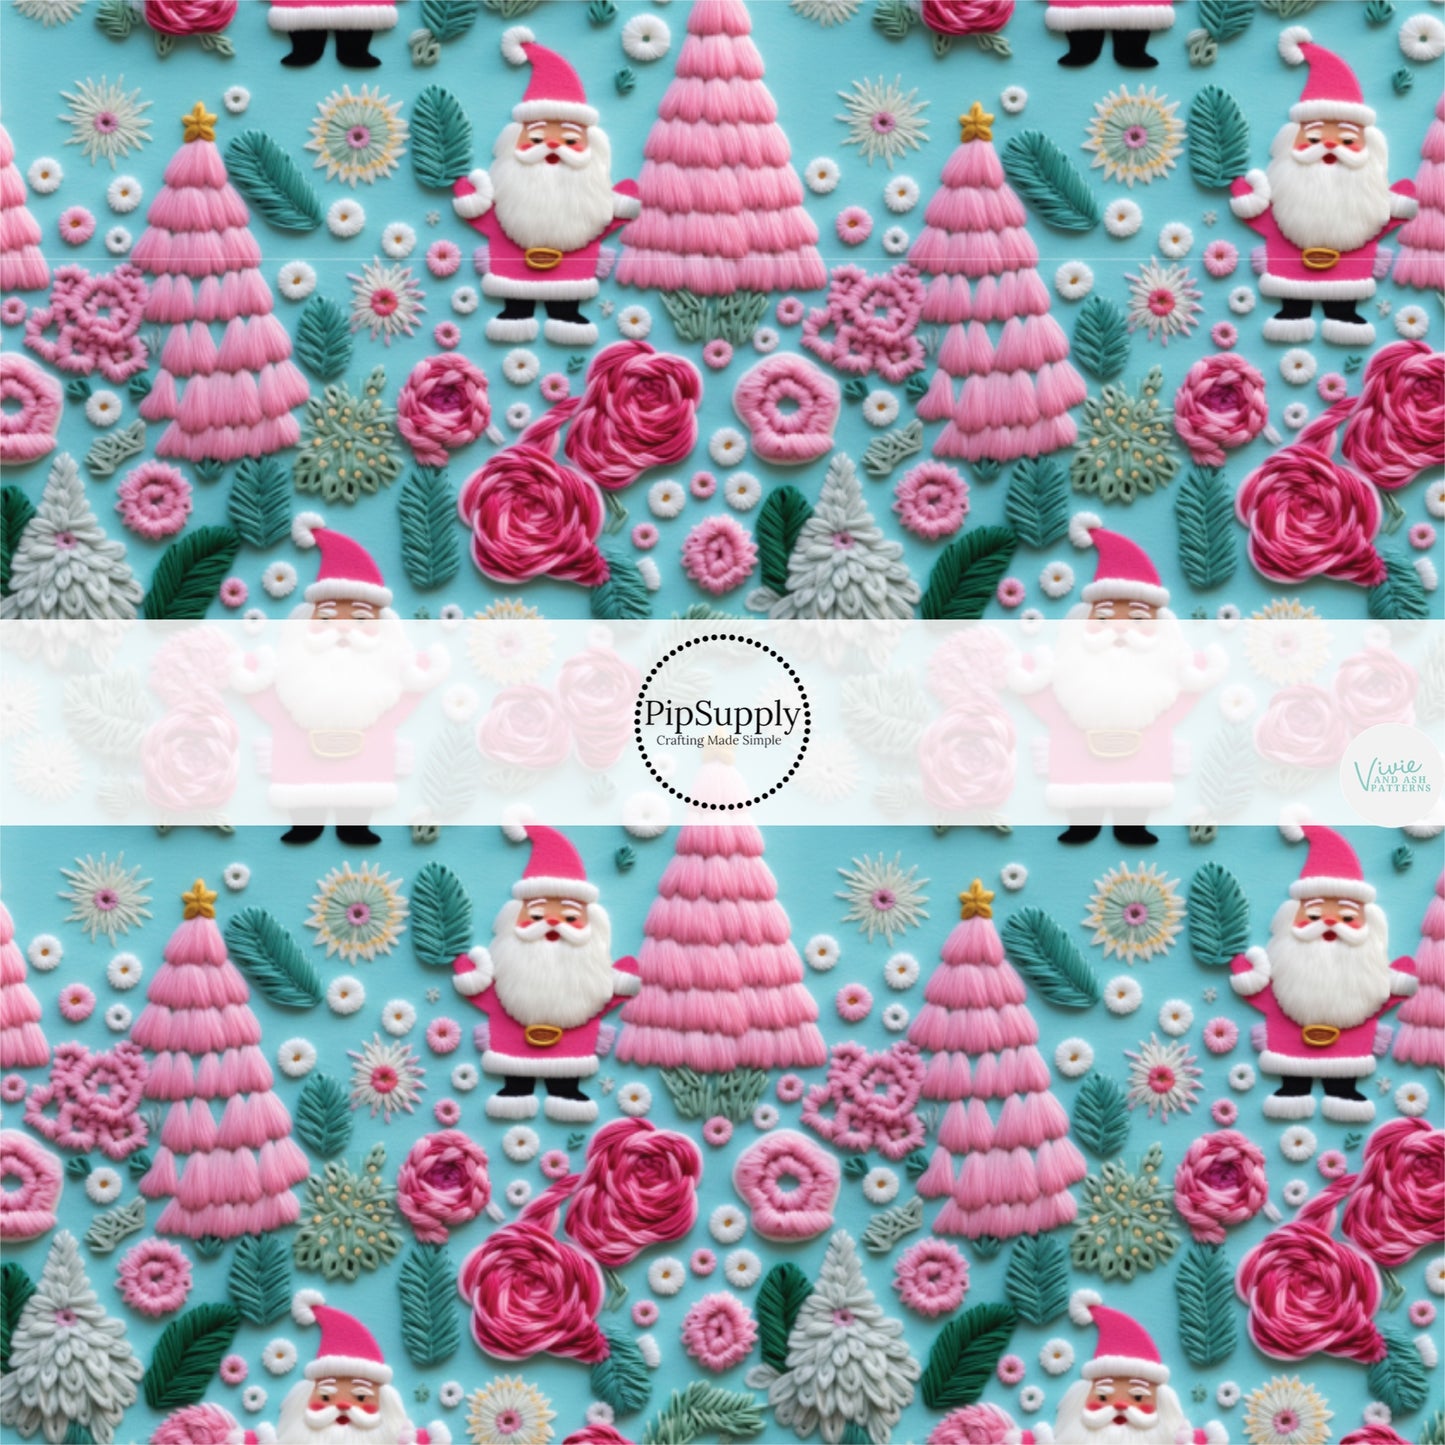 These holiday sewn pattern themed fabric by the yard features Santa and pink Christmas trees and flowers on blue. This fun Christmas fabric can be used for all your sewing and crafting needs!